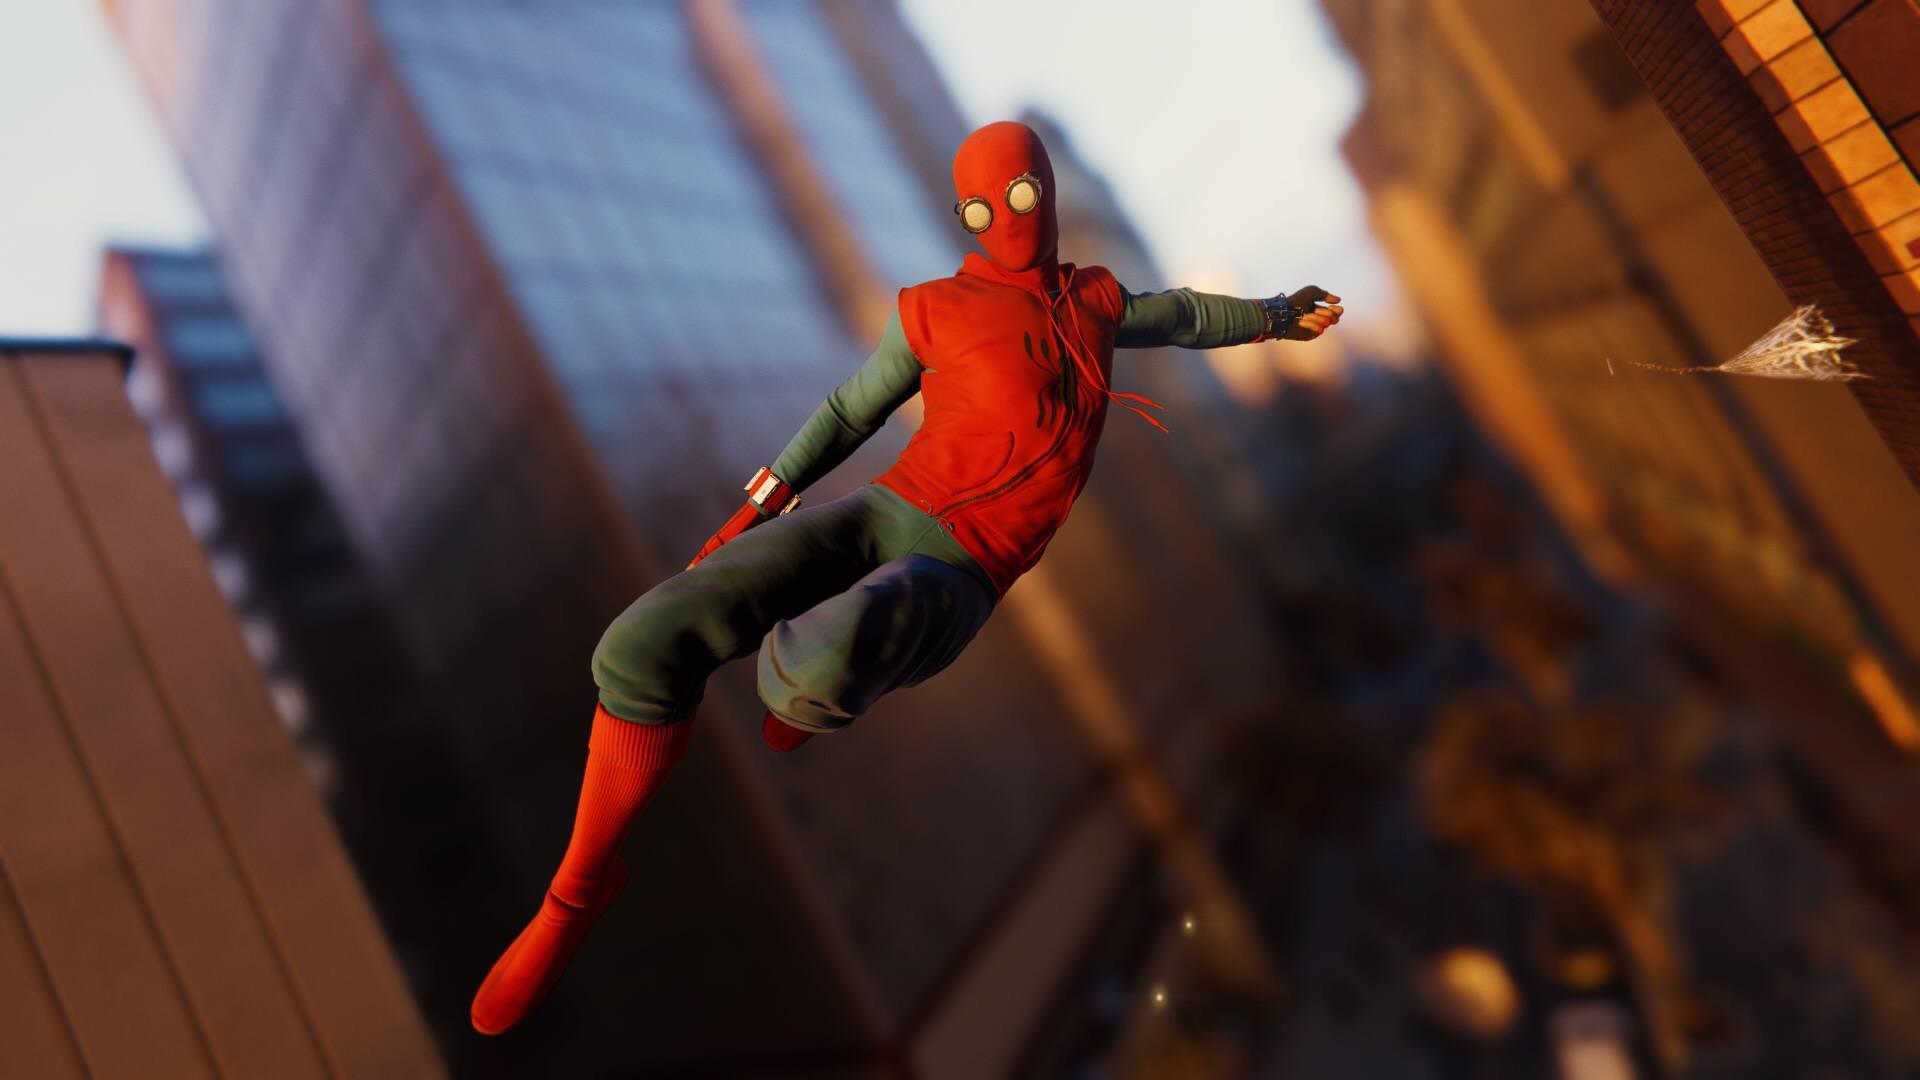 Thoughts on the homemade suit?